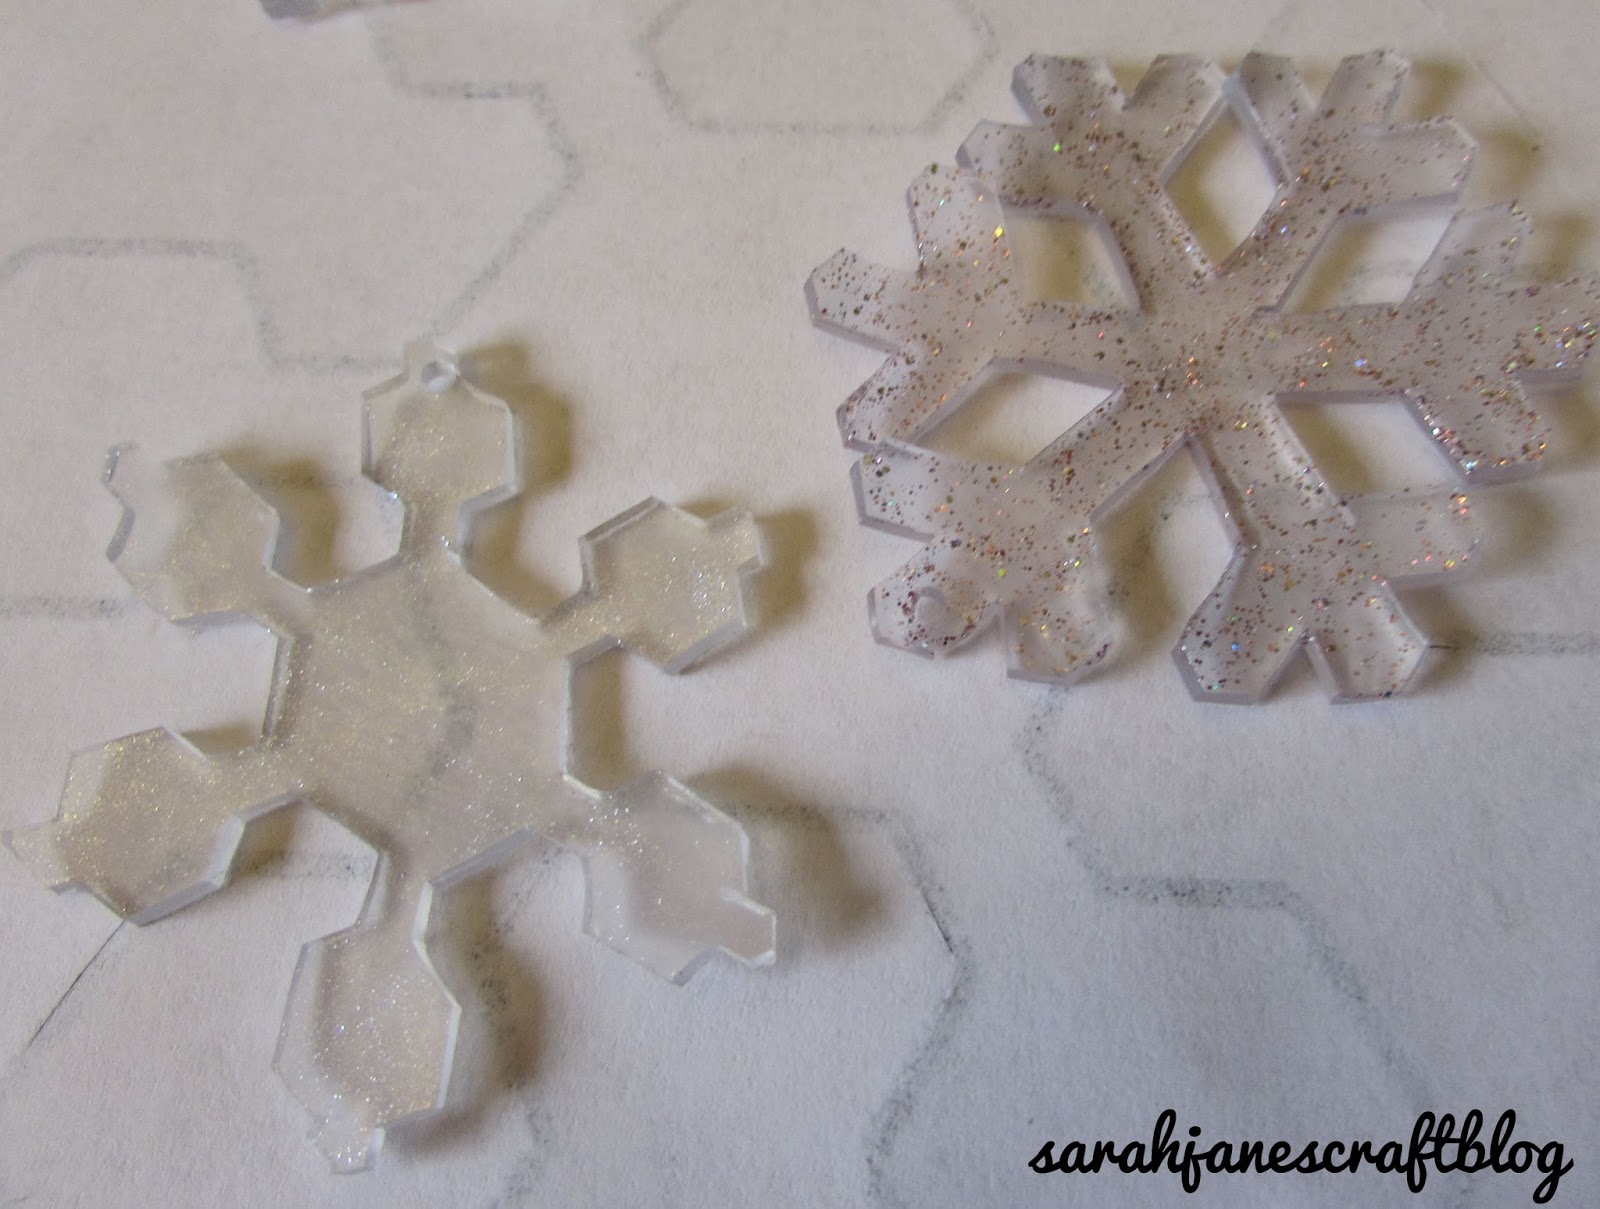 Shrink Plastic Snowflakes - Things to Make and Do, Crafts and